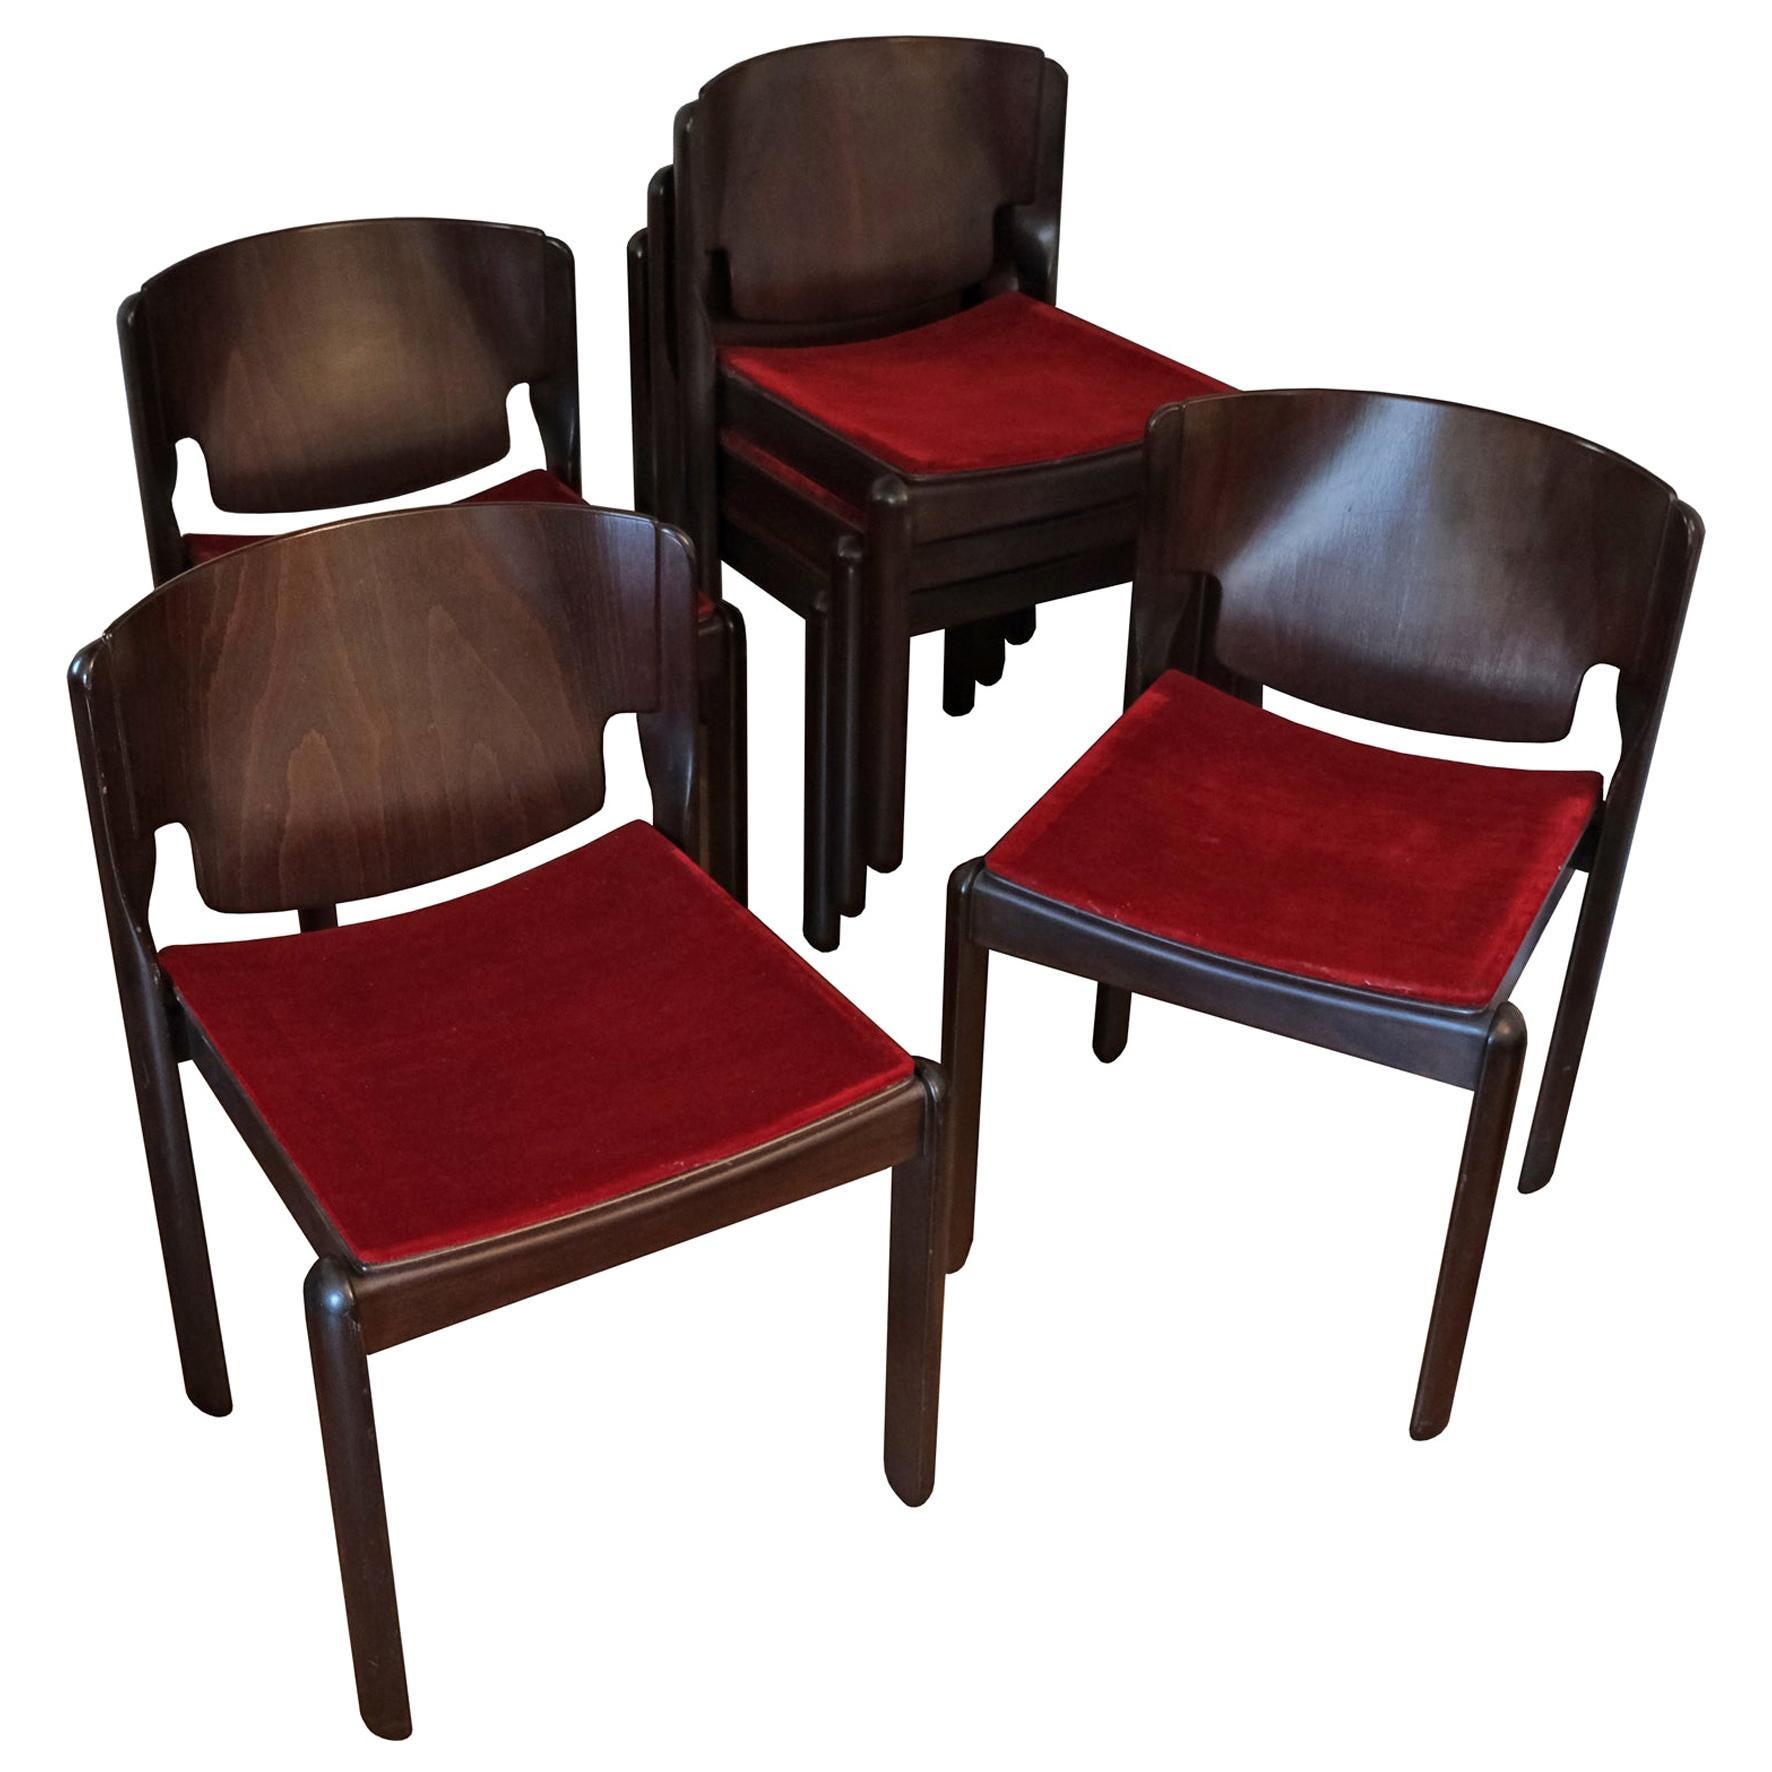 A set of six dark brown walnut stackable dining chairs. Each with a bent plywood back, the seat upholstered with burgundy velvet on four feet.
Manufactured by Cassina.
Italy.
1967.

Provenance
Private collection

Literature
Domus 444,